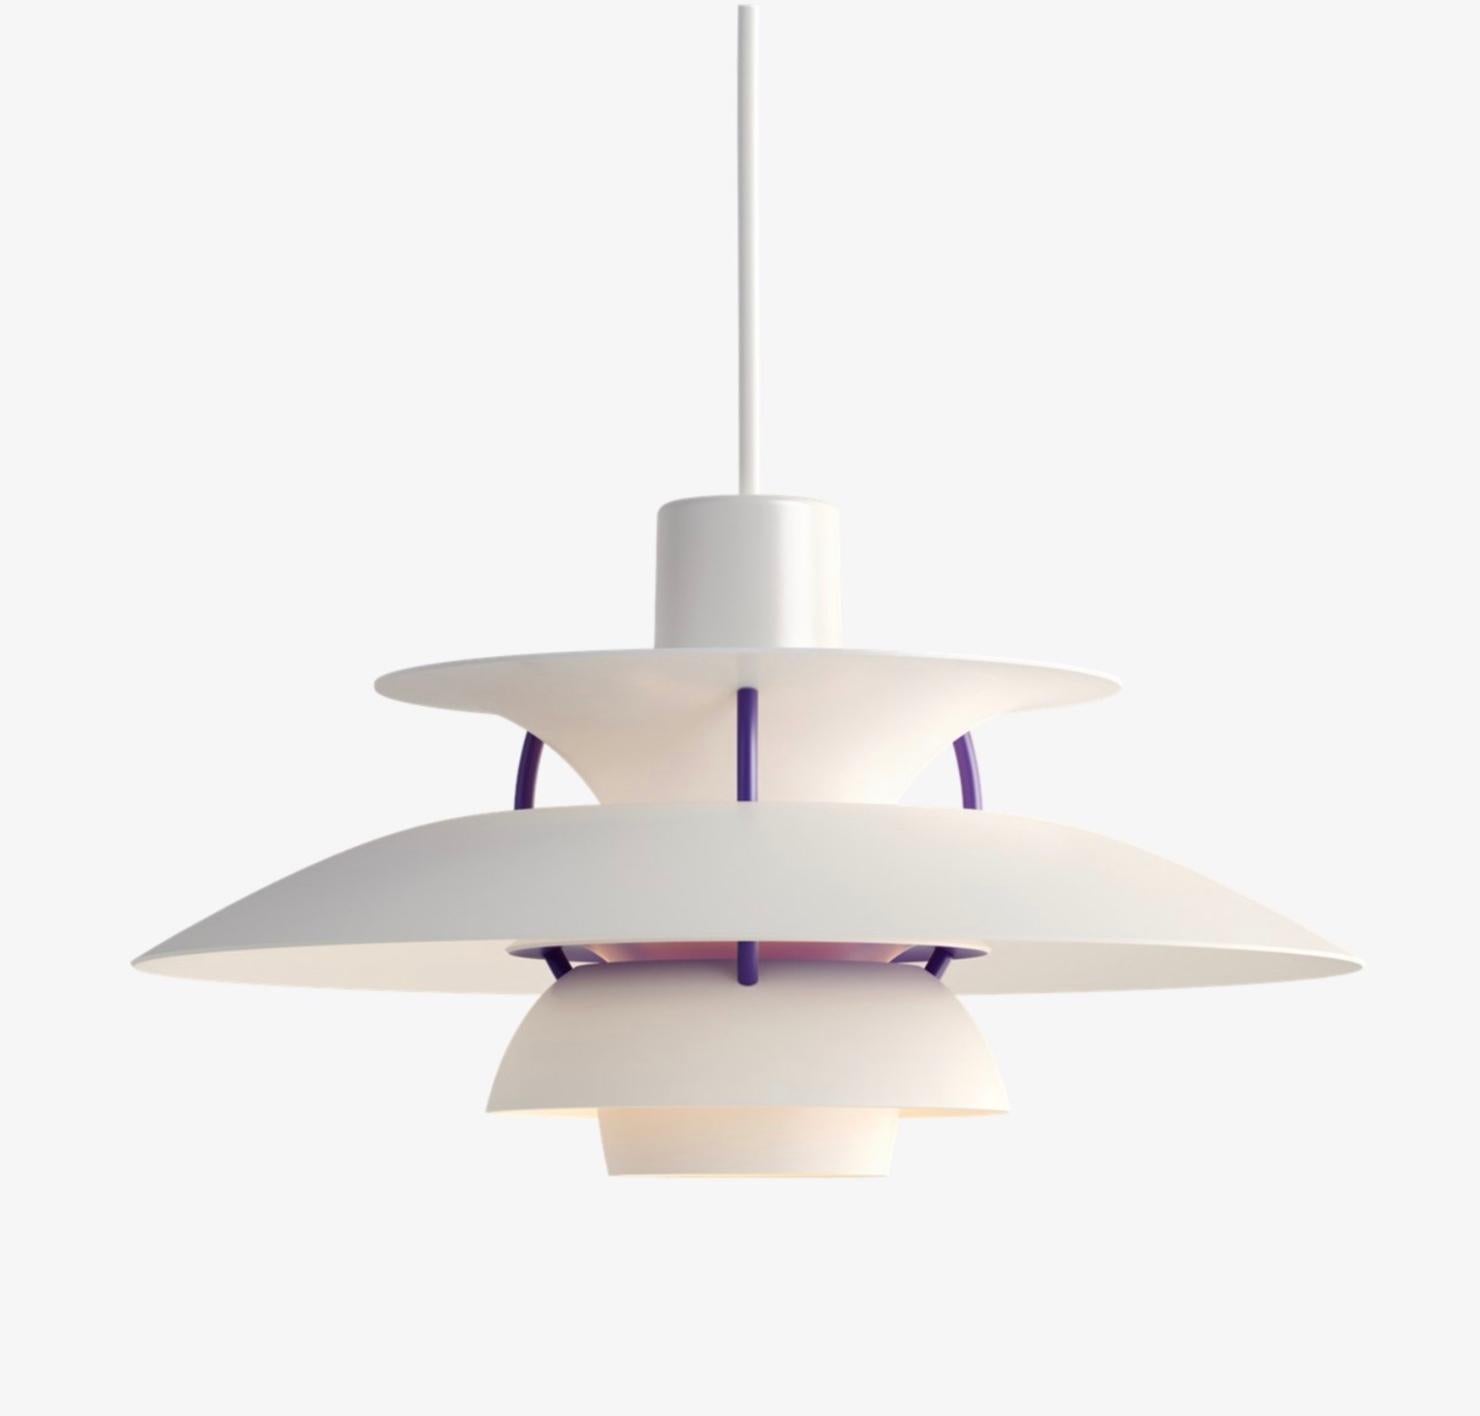 Poul Henningsen PH5 mini pendant for Louis Poulsen. Designed 1958, Mini in 2017. New, current production.

Poul Henningsen developed the PH 5 in 1958 in response to constant changes made to the shape and Size of incandescent bulbs by bulb